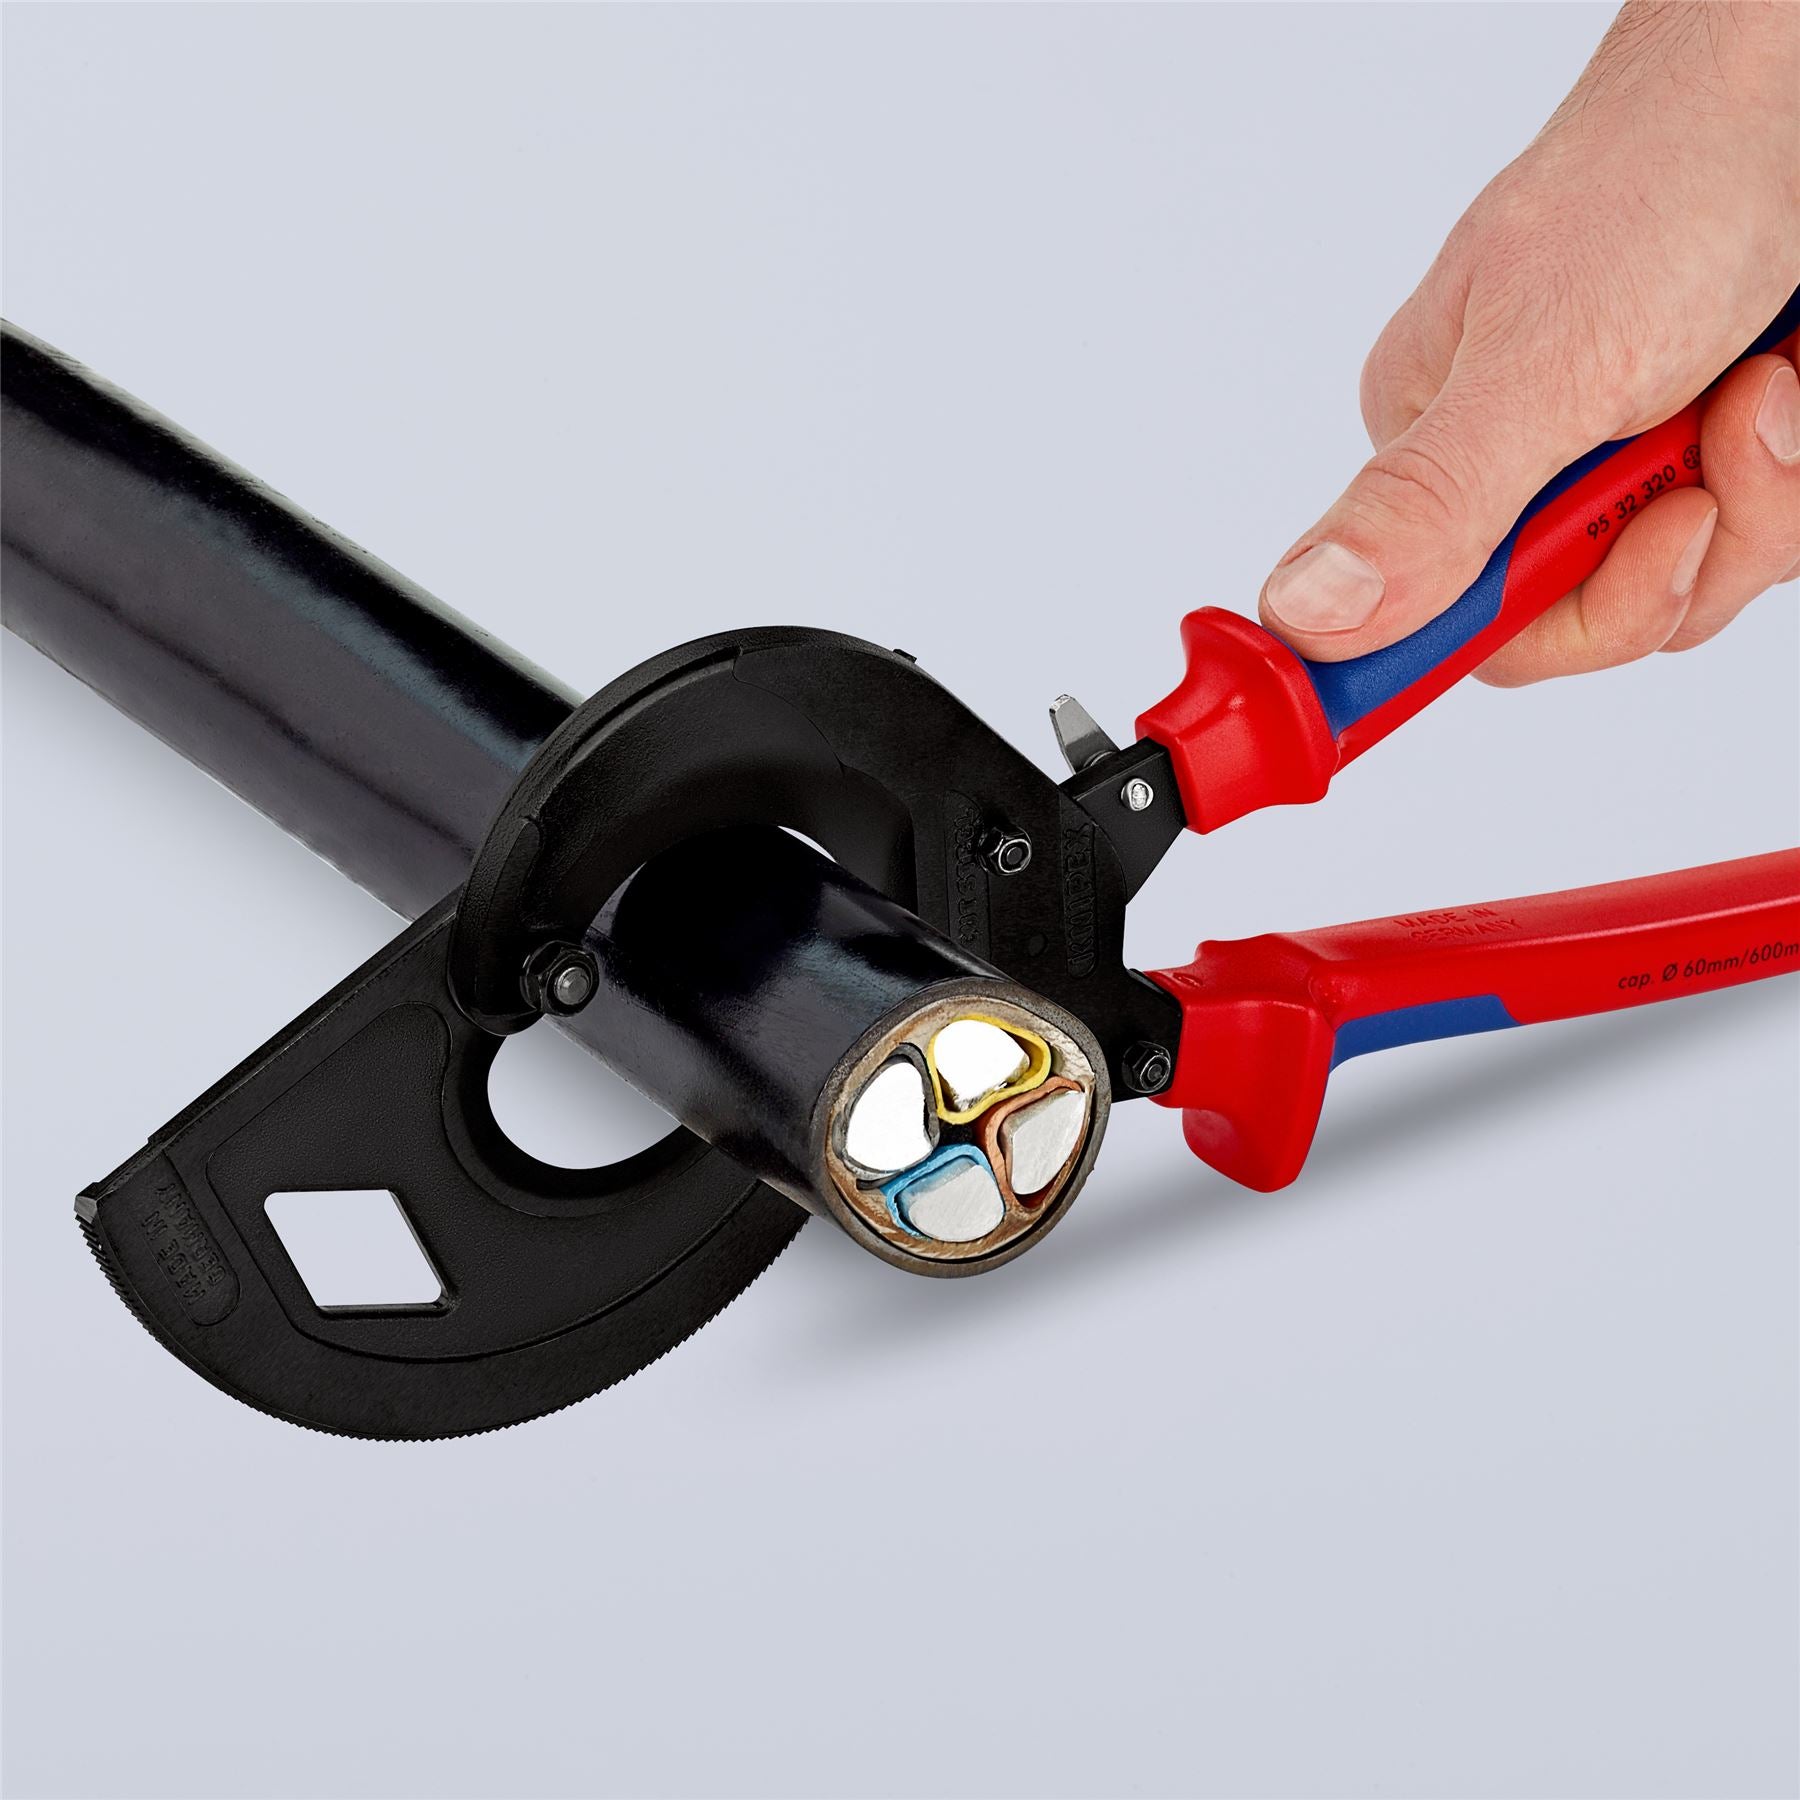 KNIPEX Cable Cutter Ratchet Action 3 Stage 60mm Diameter Cutting Capacity 320mm Multi Component Grips 95 32 320